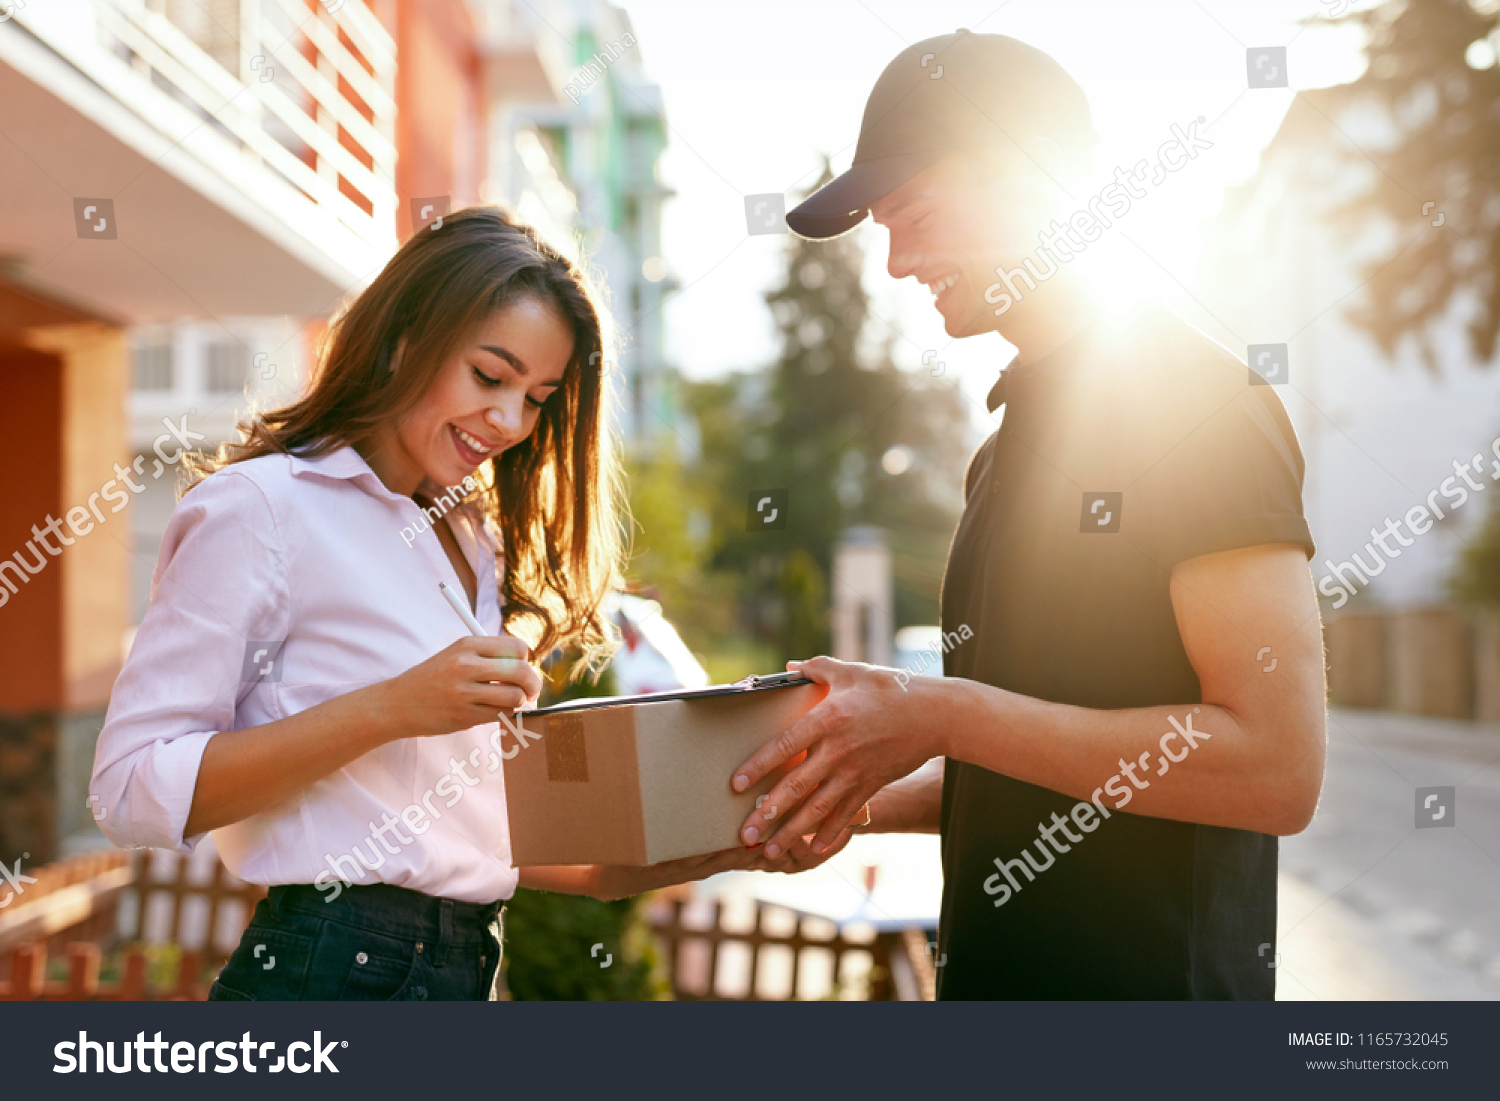 Courier Delivering Package To Woman, Client Signing Document #1165732045